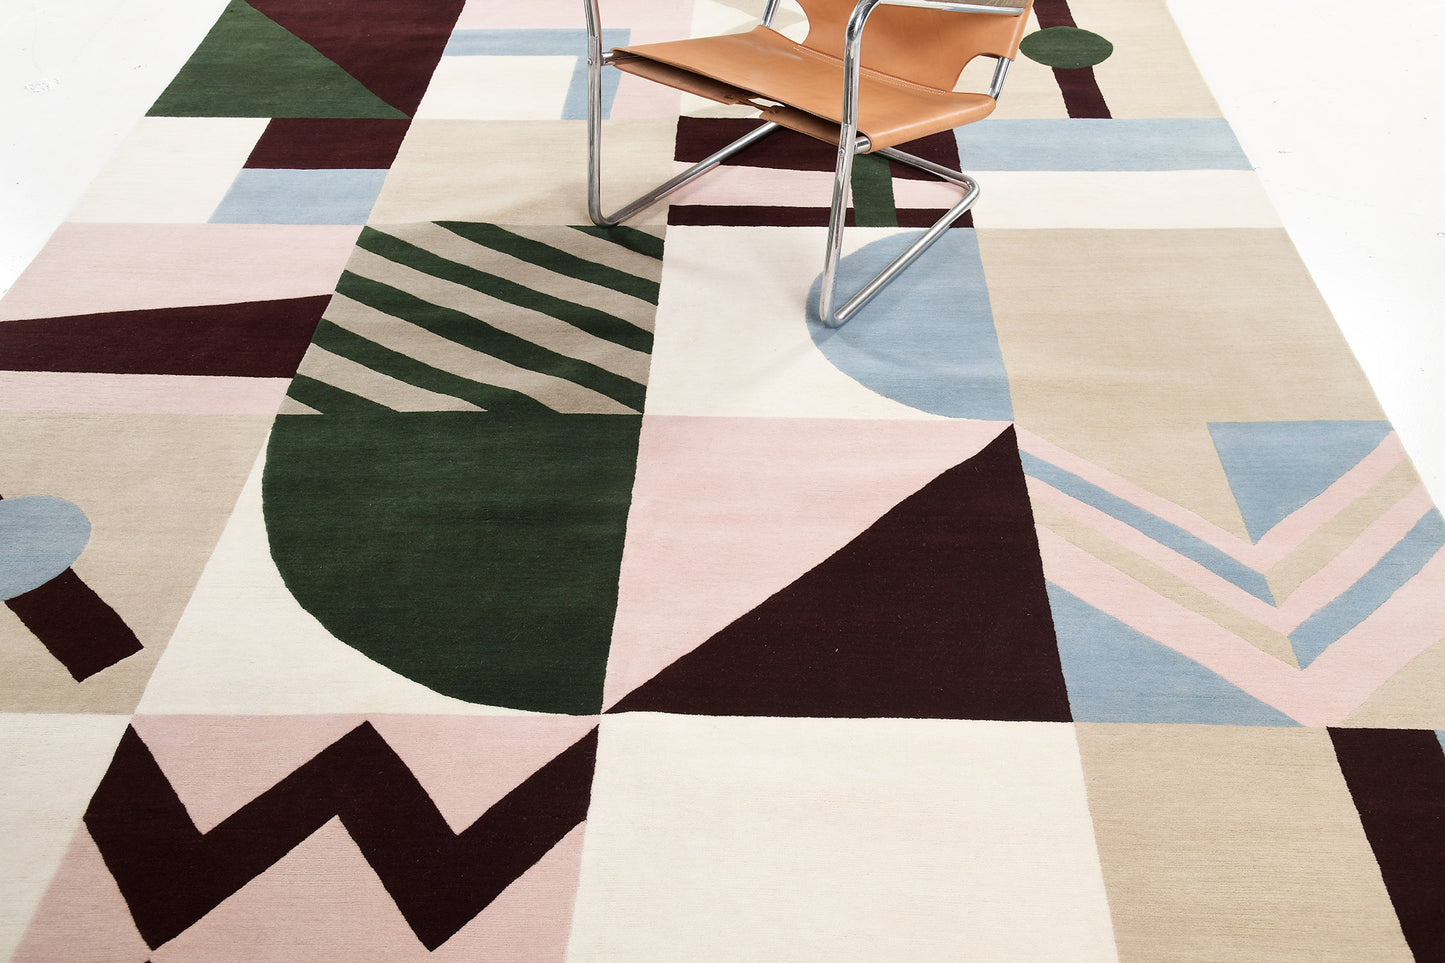 Modern Rug Image 9206 Pazzo, Baci Collection by Citizen Artist